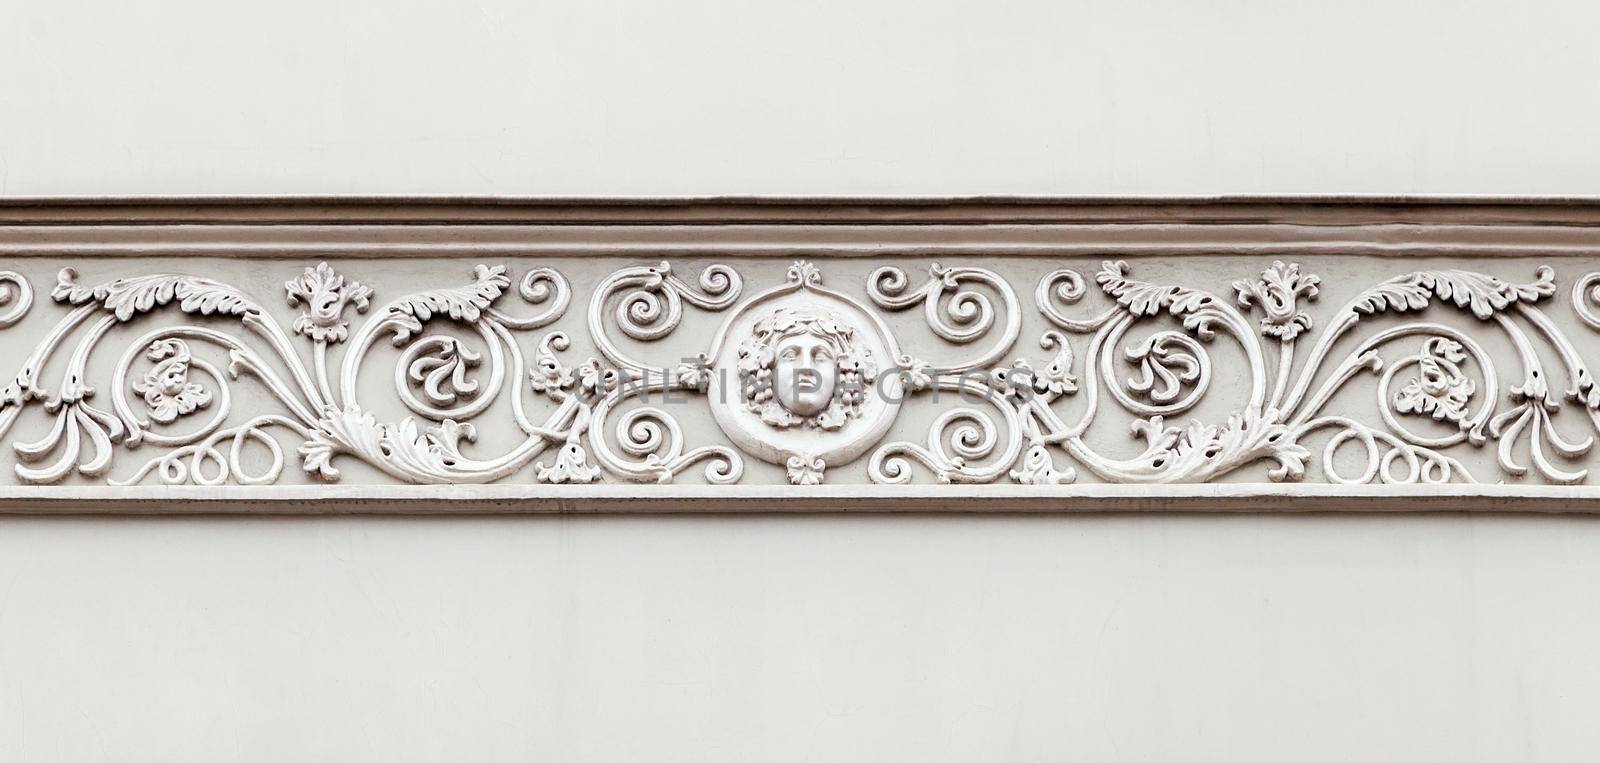 Wall ornament in art nouveau style by Goodday